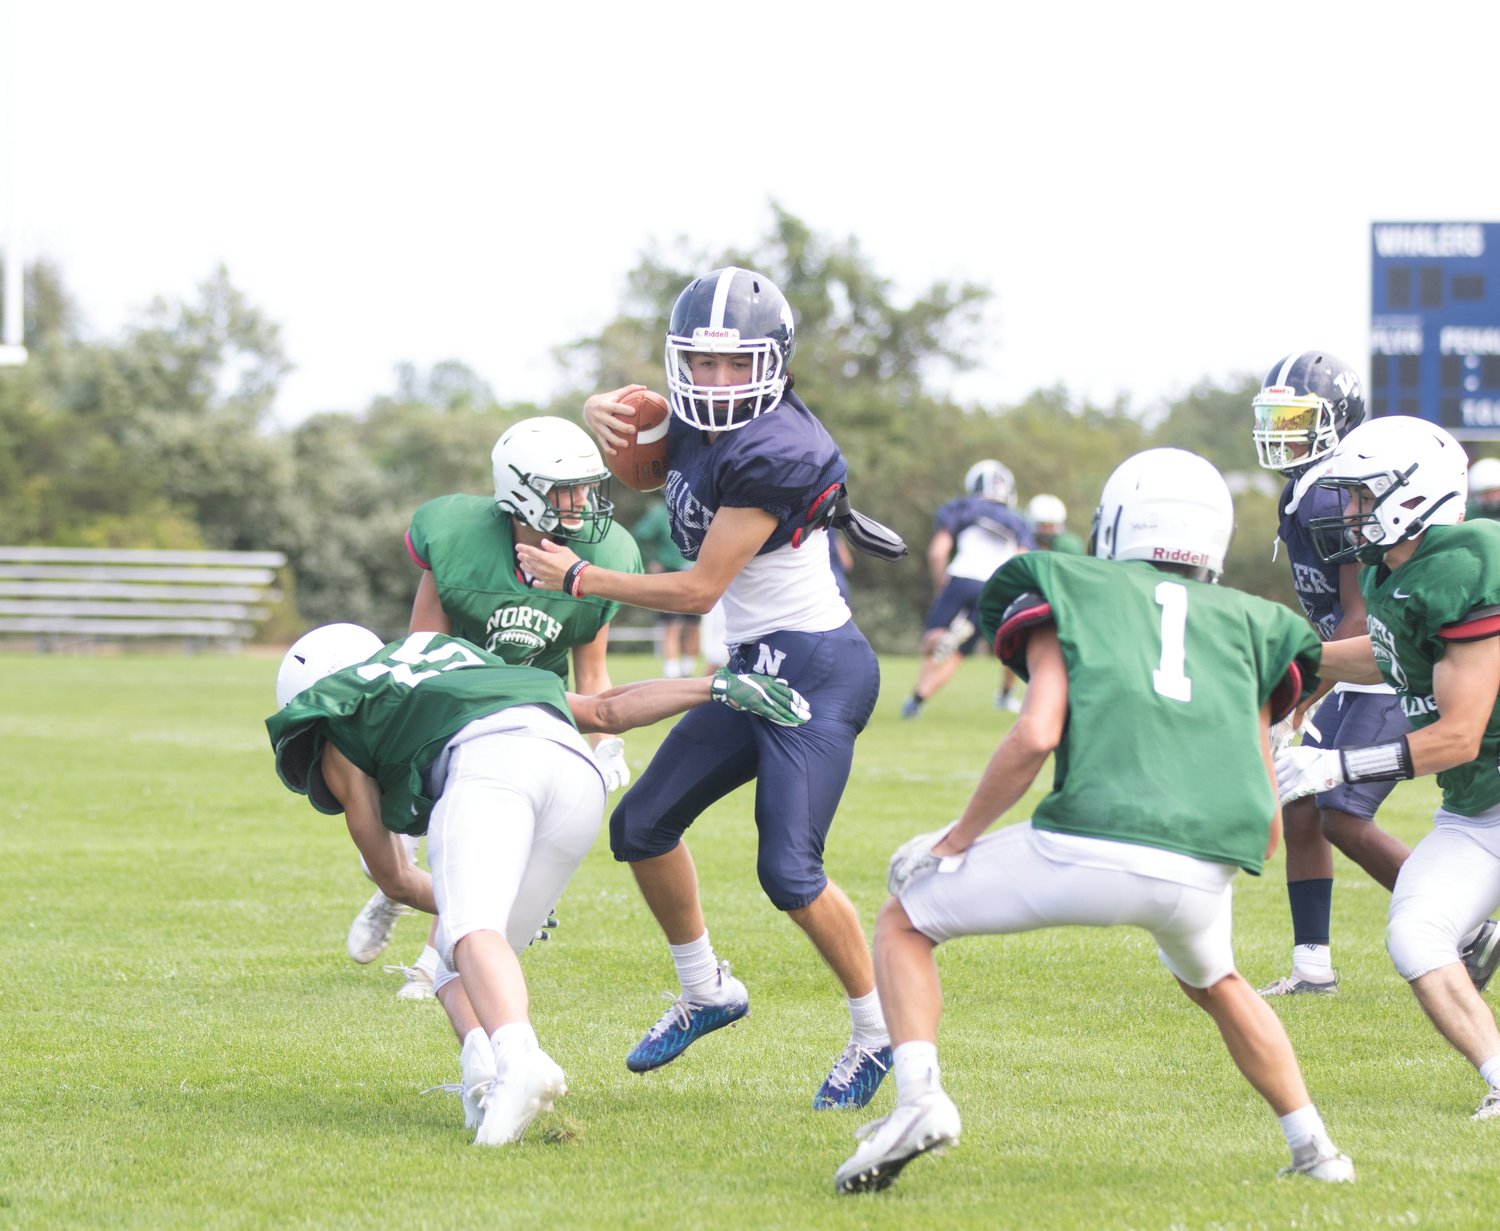 Sophomore quarterback Carlos Aguilar dodges a gang of North Reading tacklers in Saturday’s home scrimmage.